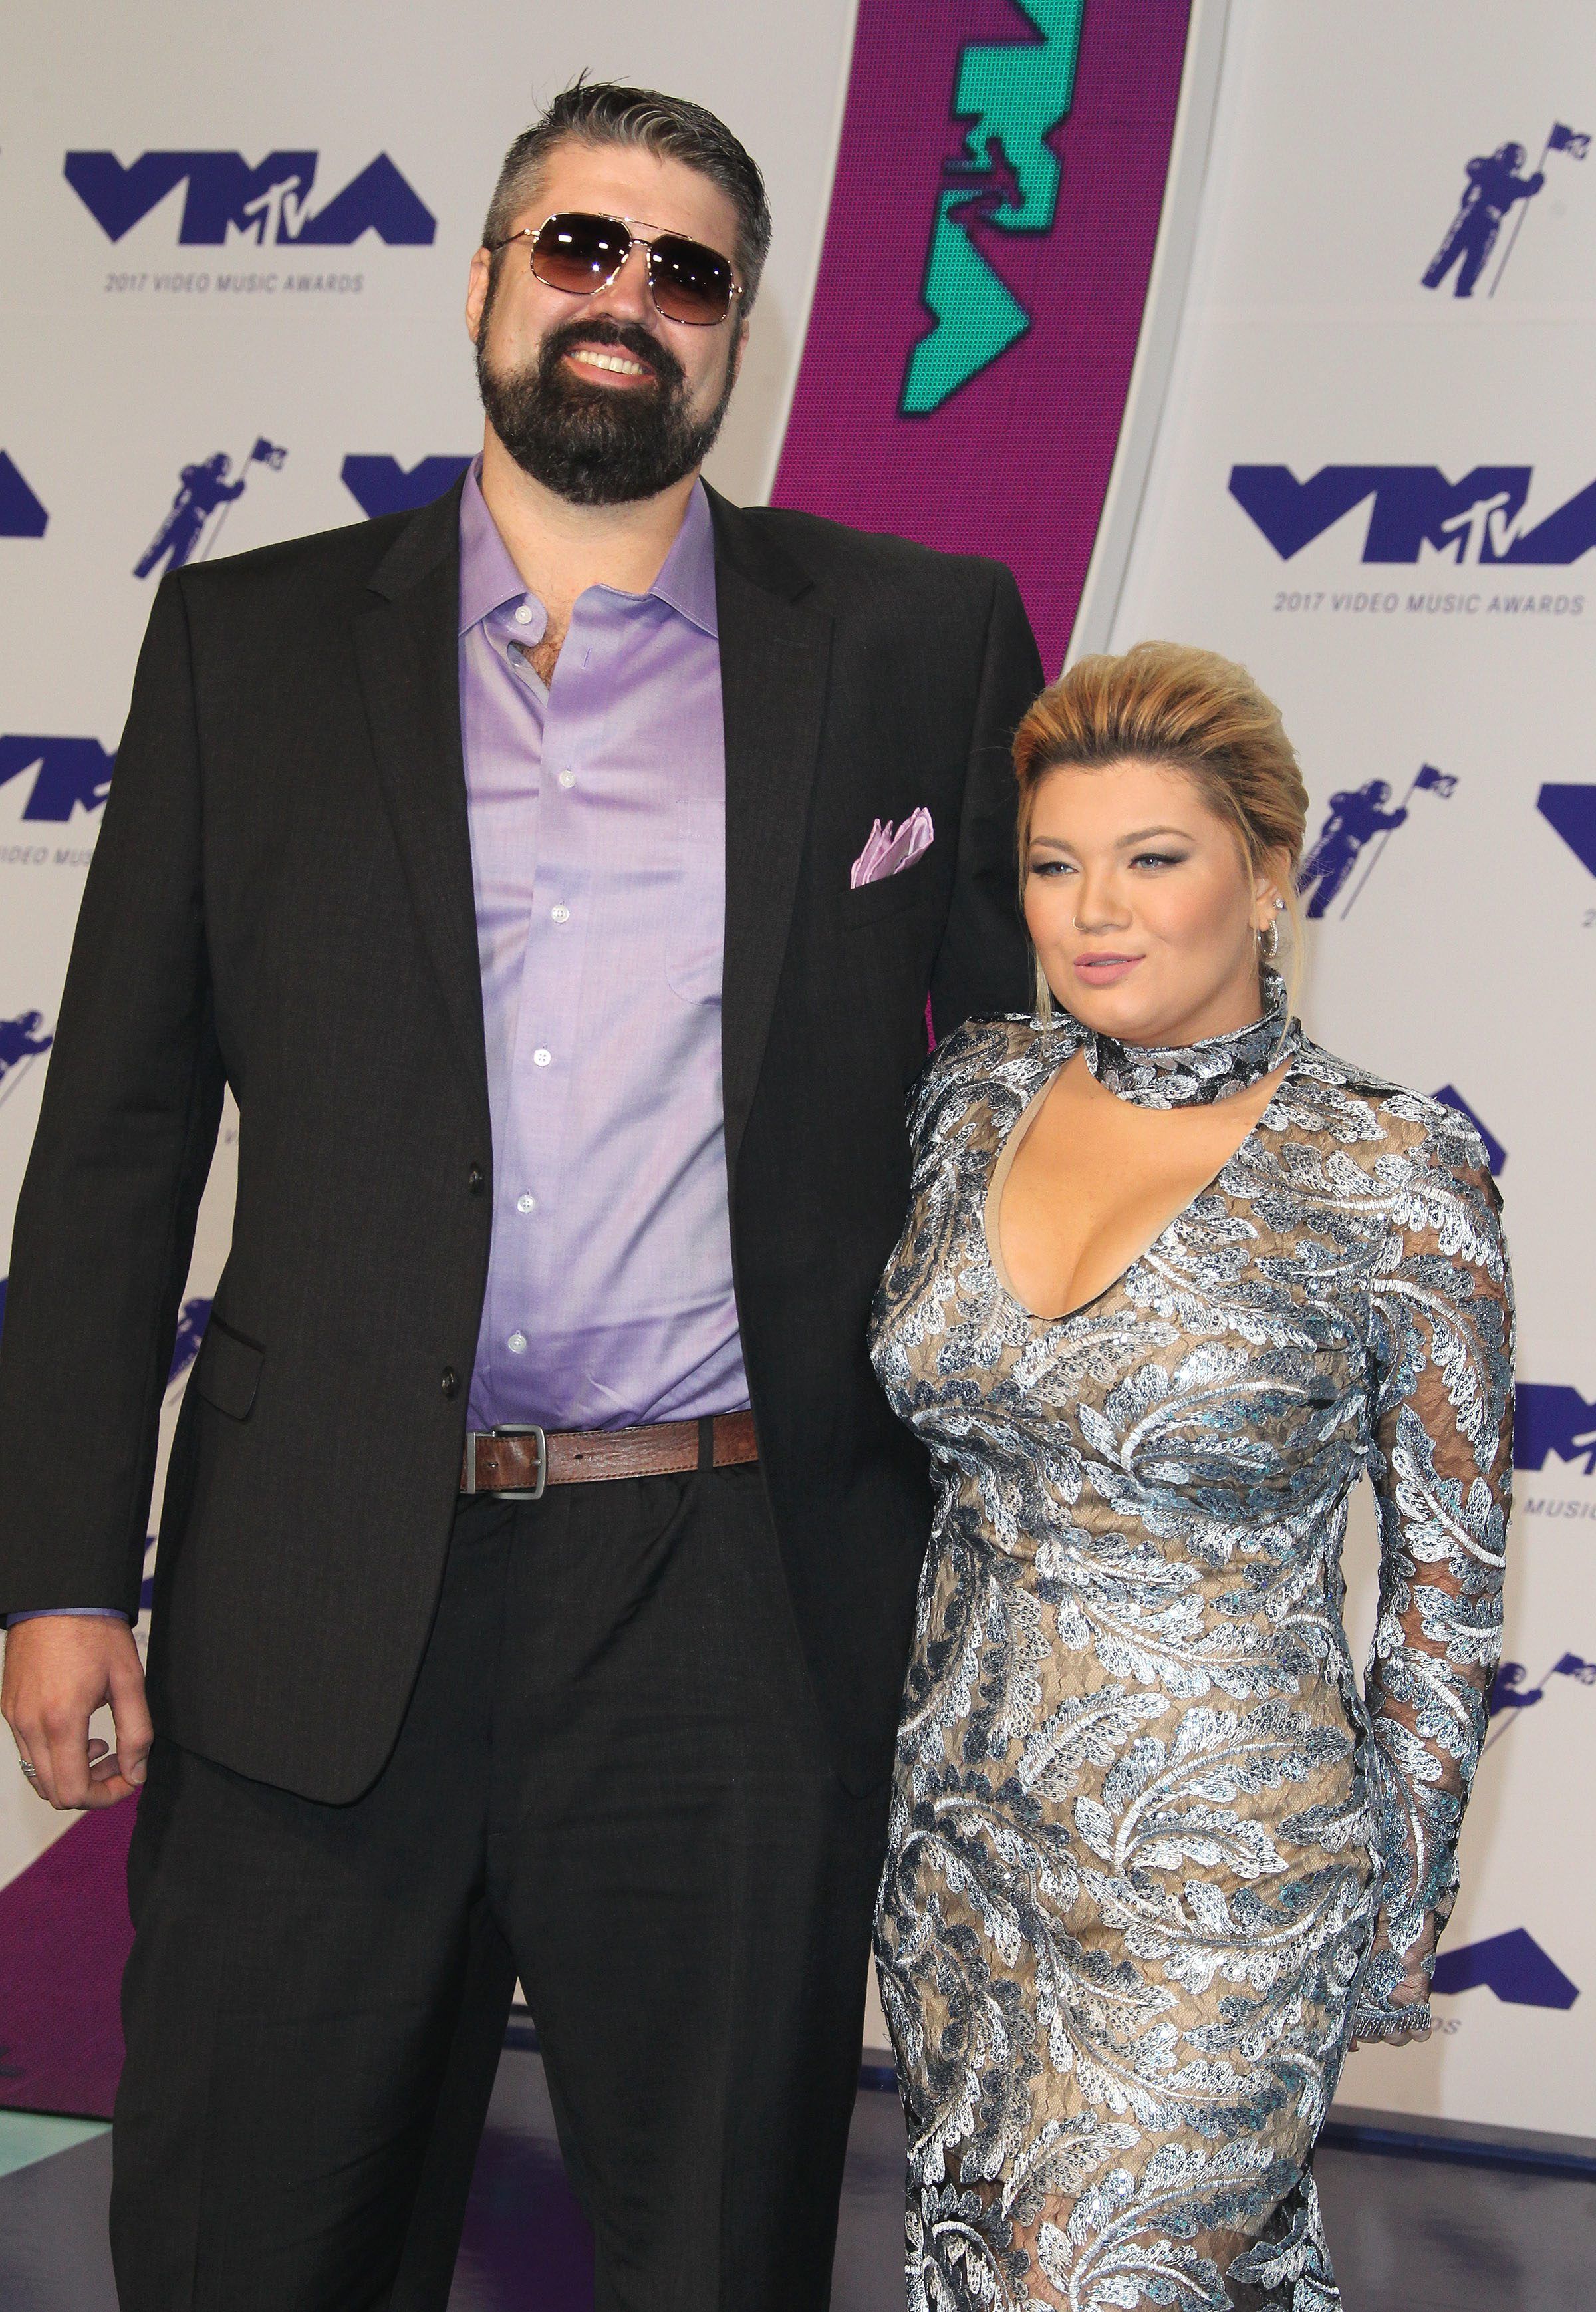 Teen Mom Star Amber Portwood Sentenced to 5 Years in Prison | Hollywood Reporter